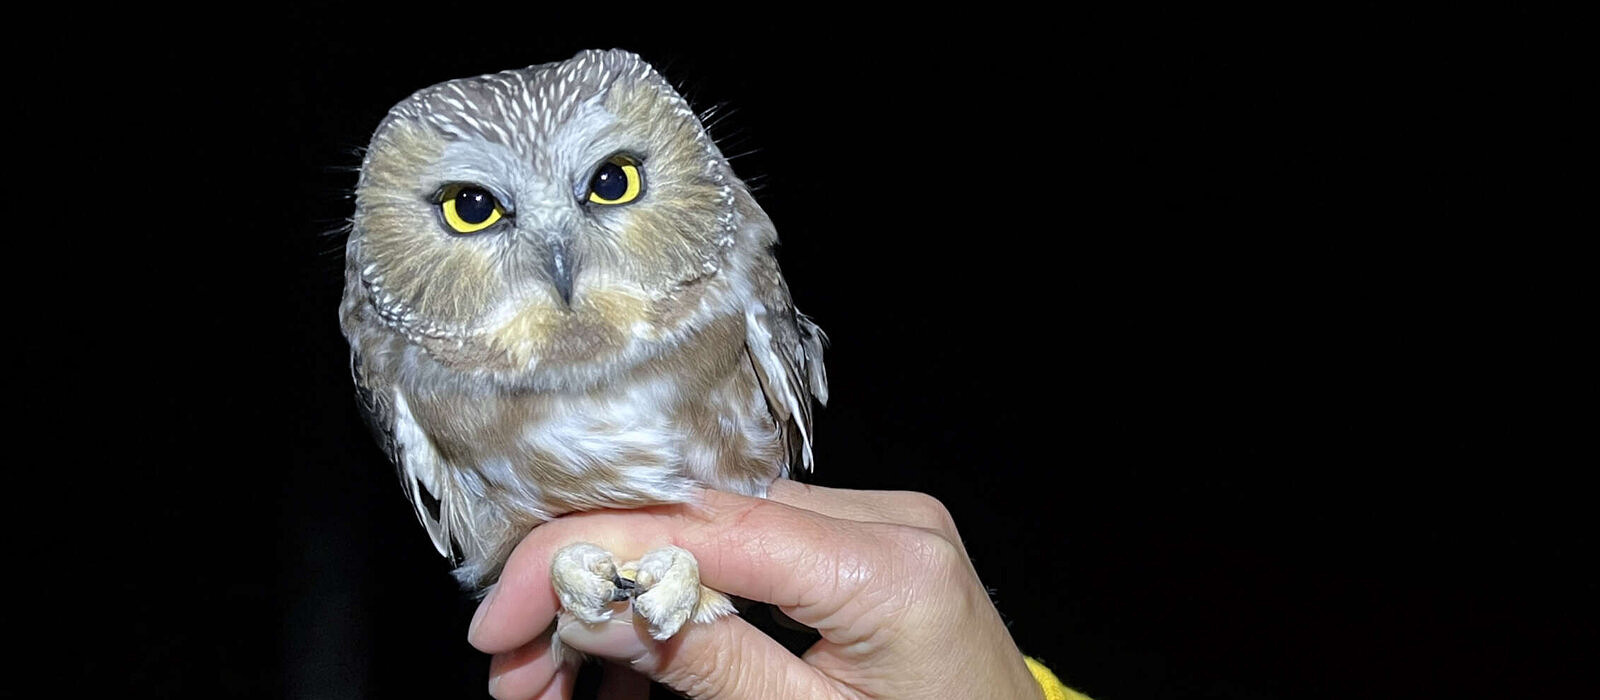 A saw-whet owl, being held in a human hand. (photo © Brett Amy Thelen)